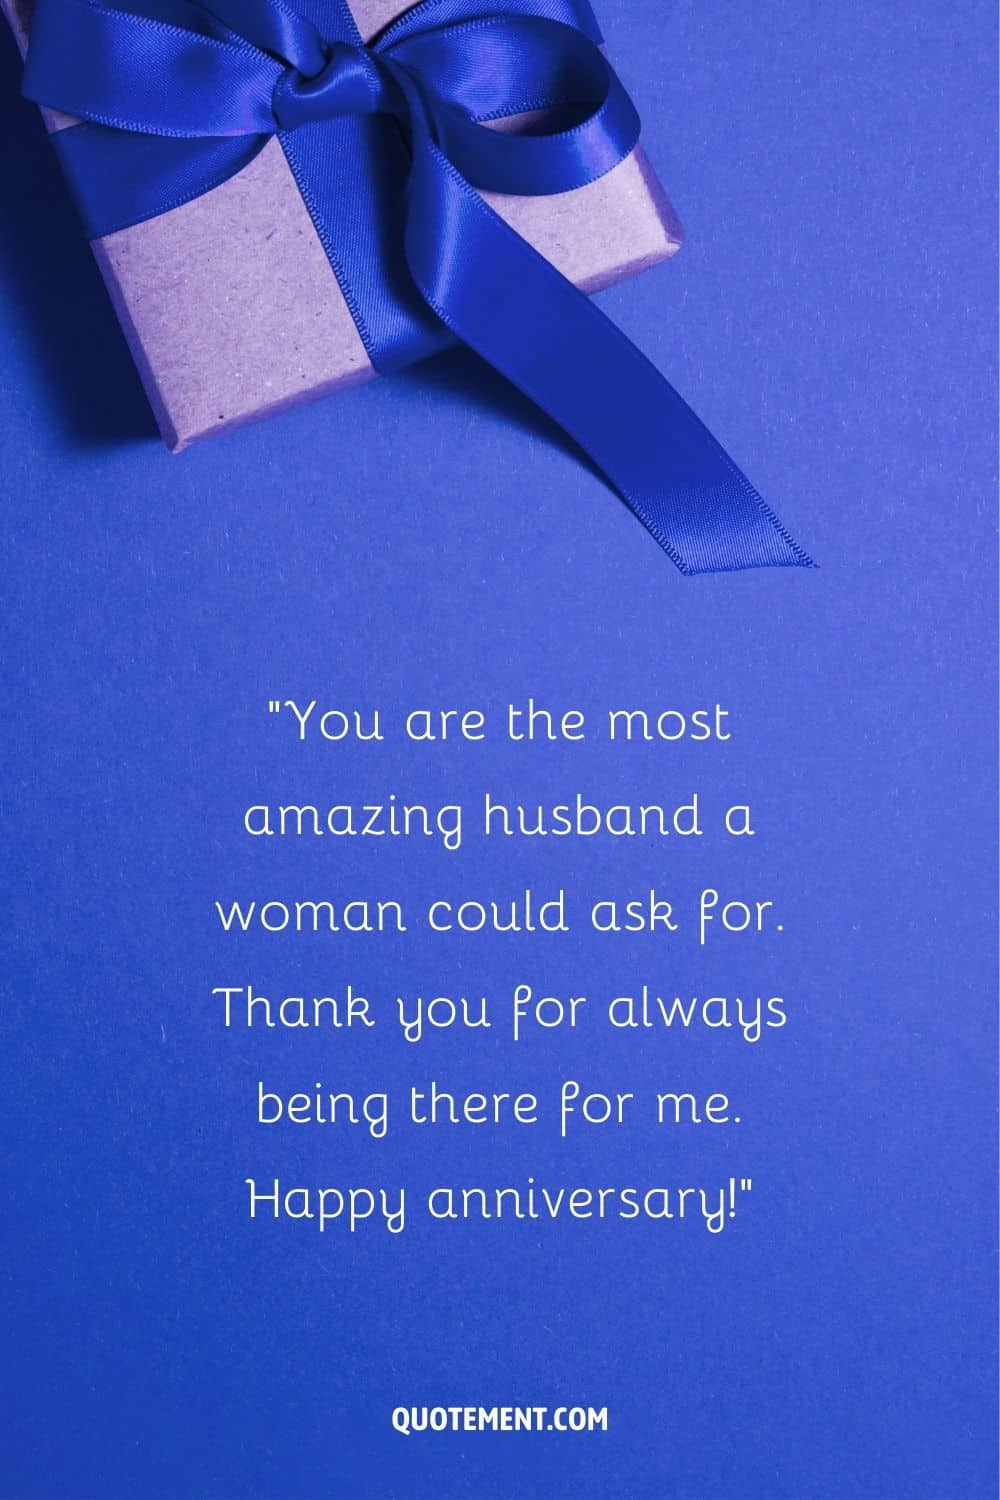 Thank you for always being there for me. Happy anniversary!